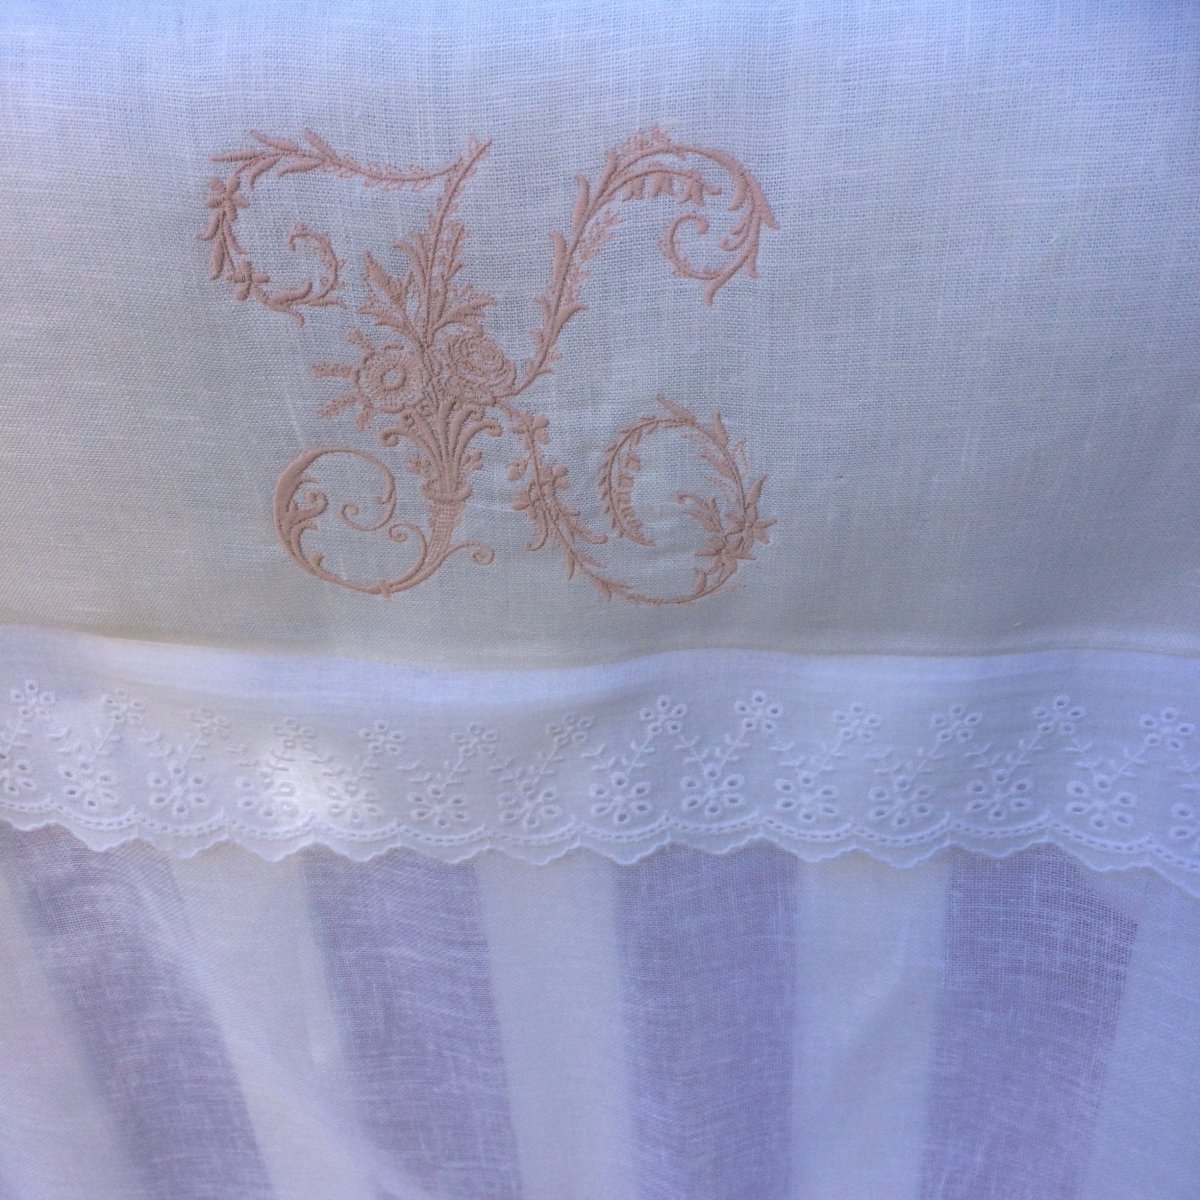 Heirloom Baby Crib Rail Cover - Linen and Letters